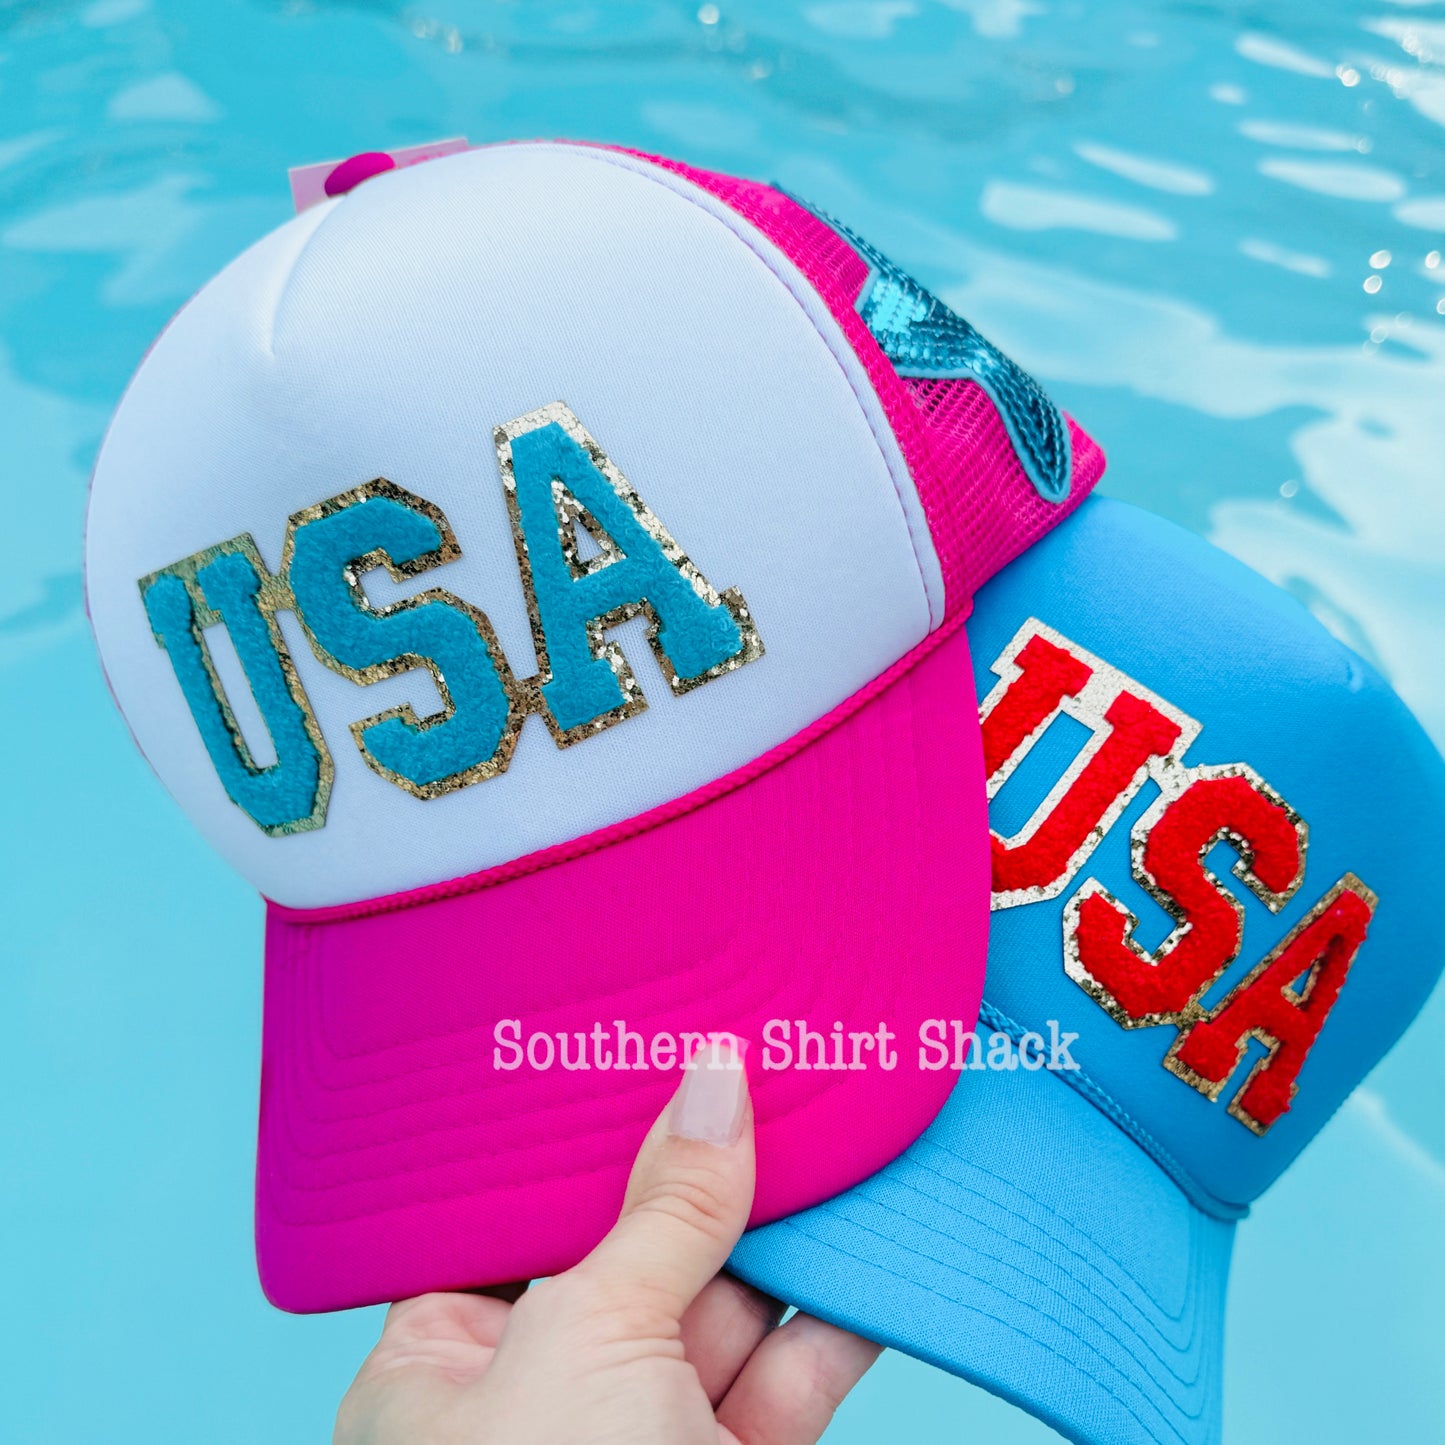 USA chenille patch trucker hat with side star patch